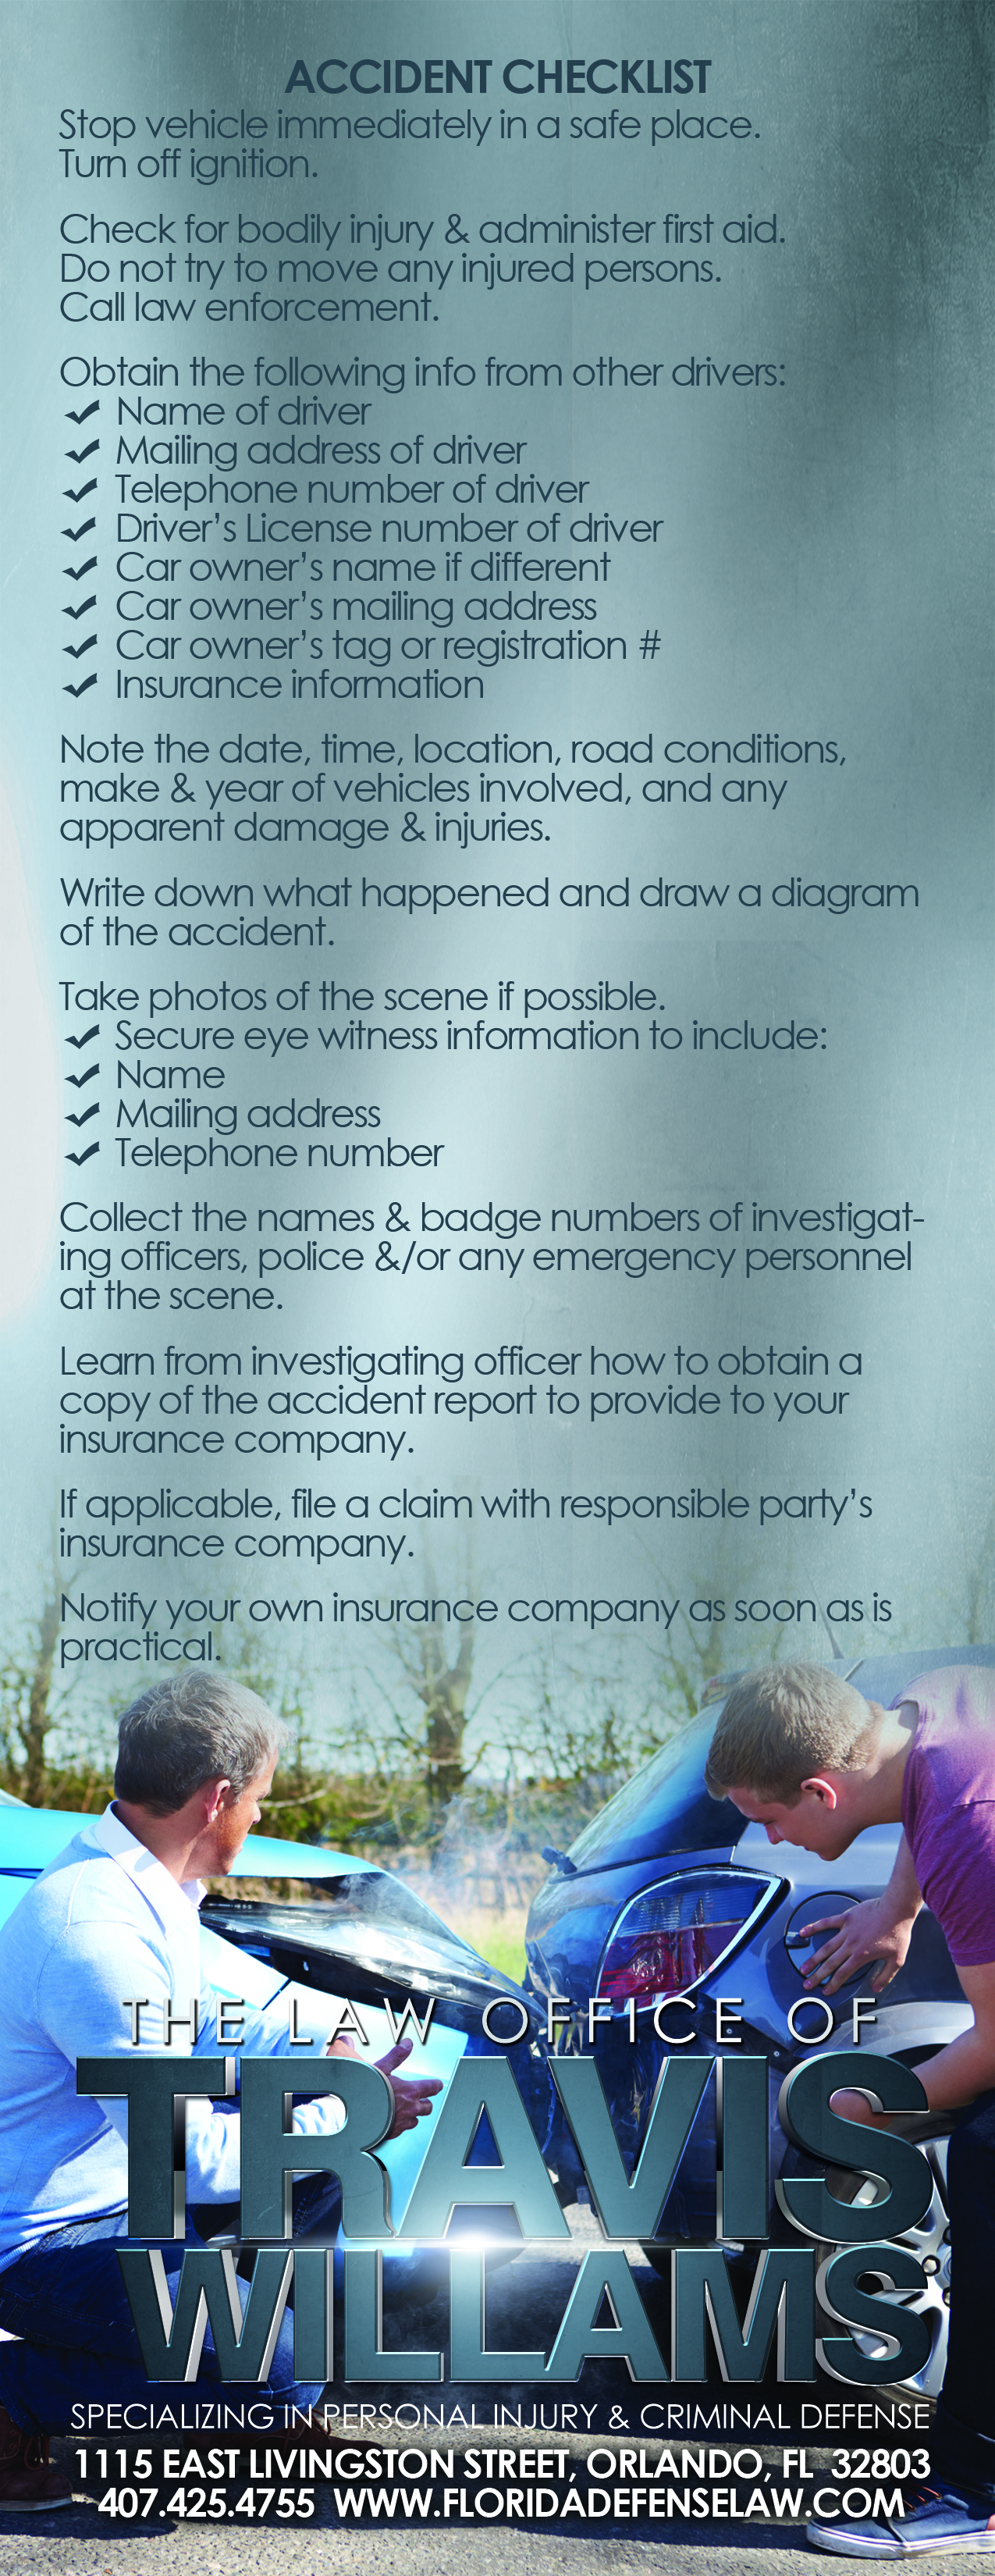 Accident Checklist Front-Final